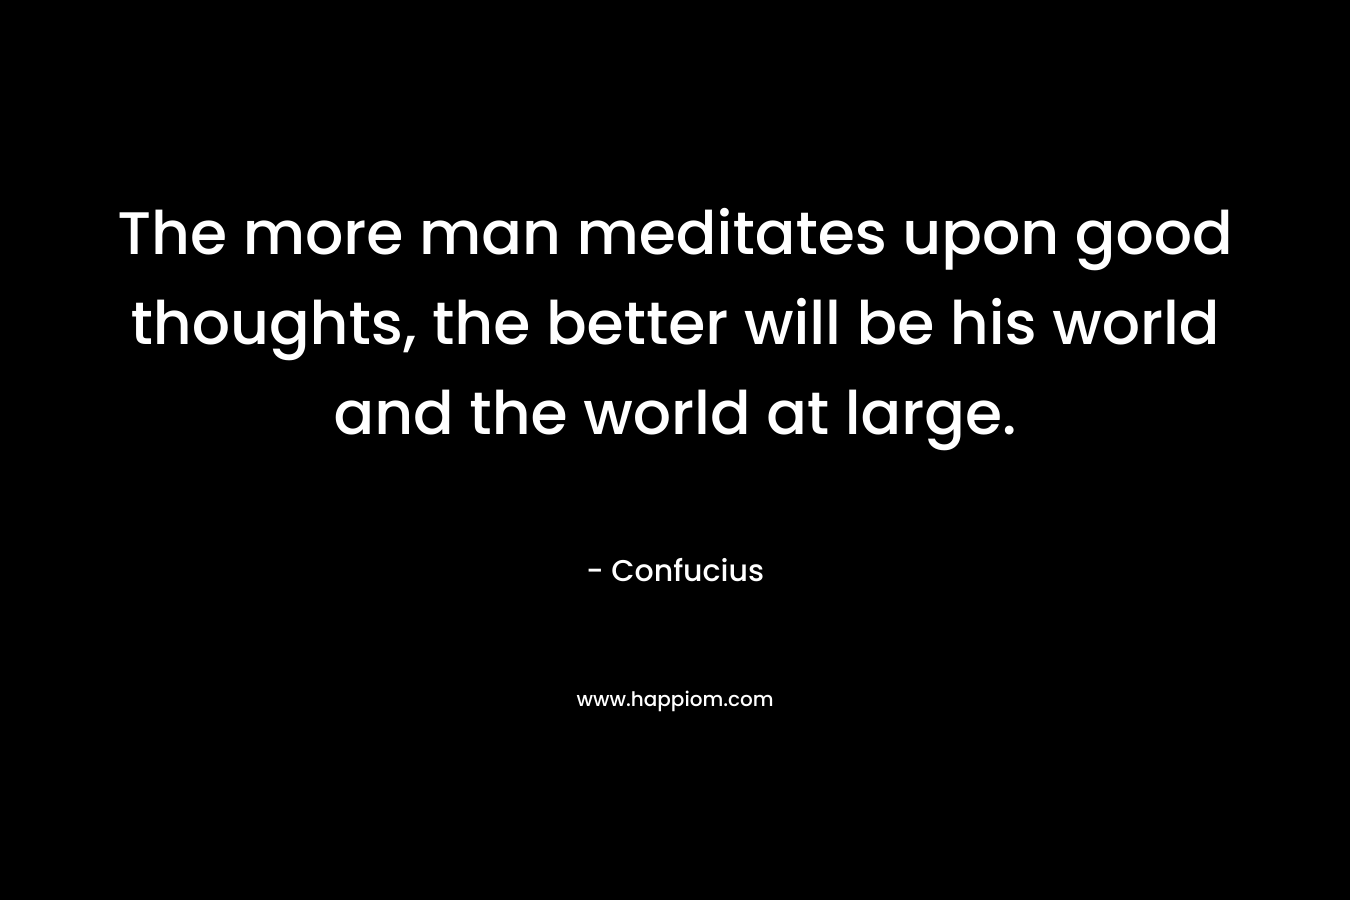 The more man meditates upon good thoughts, the better will be his world and the world at large. – Confucius